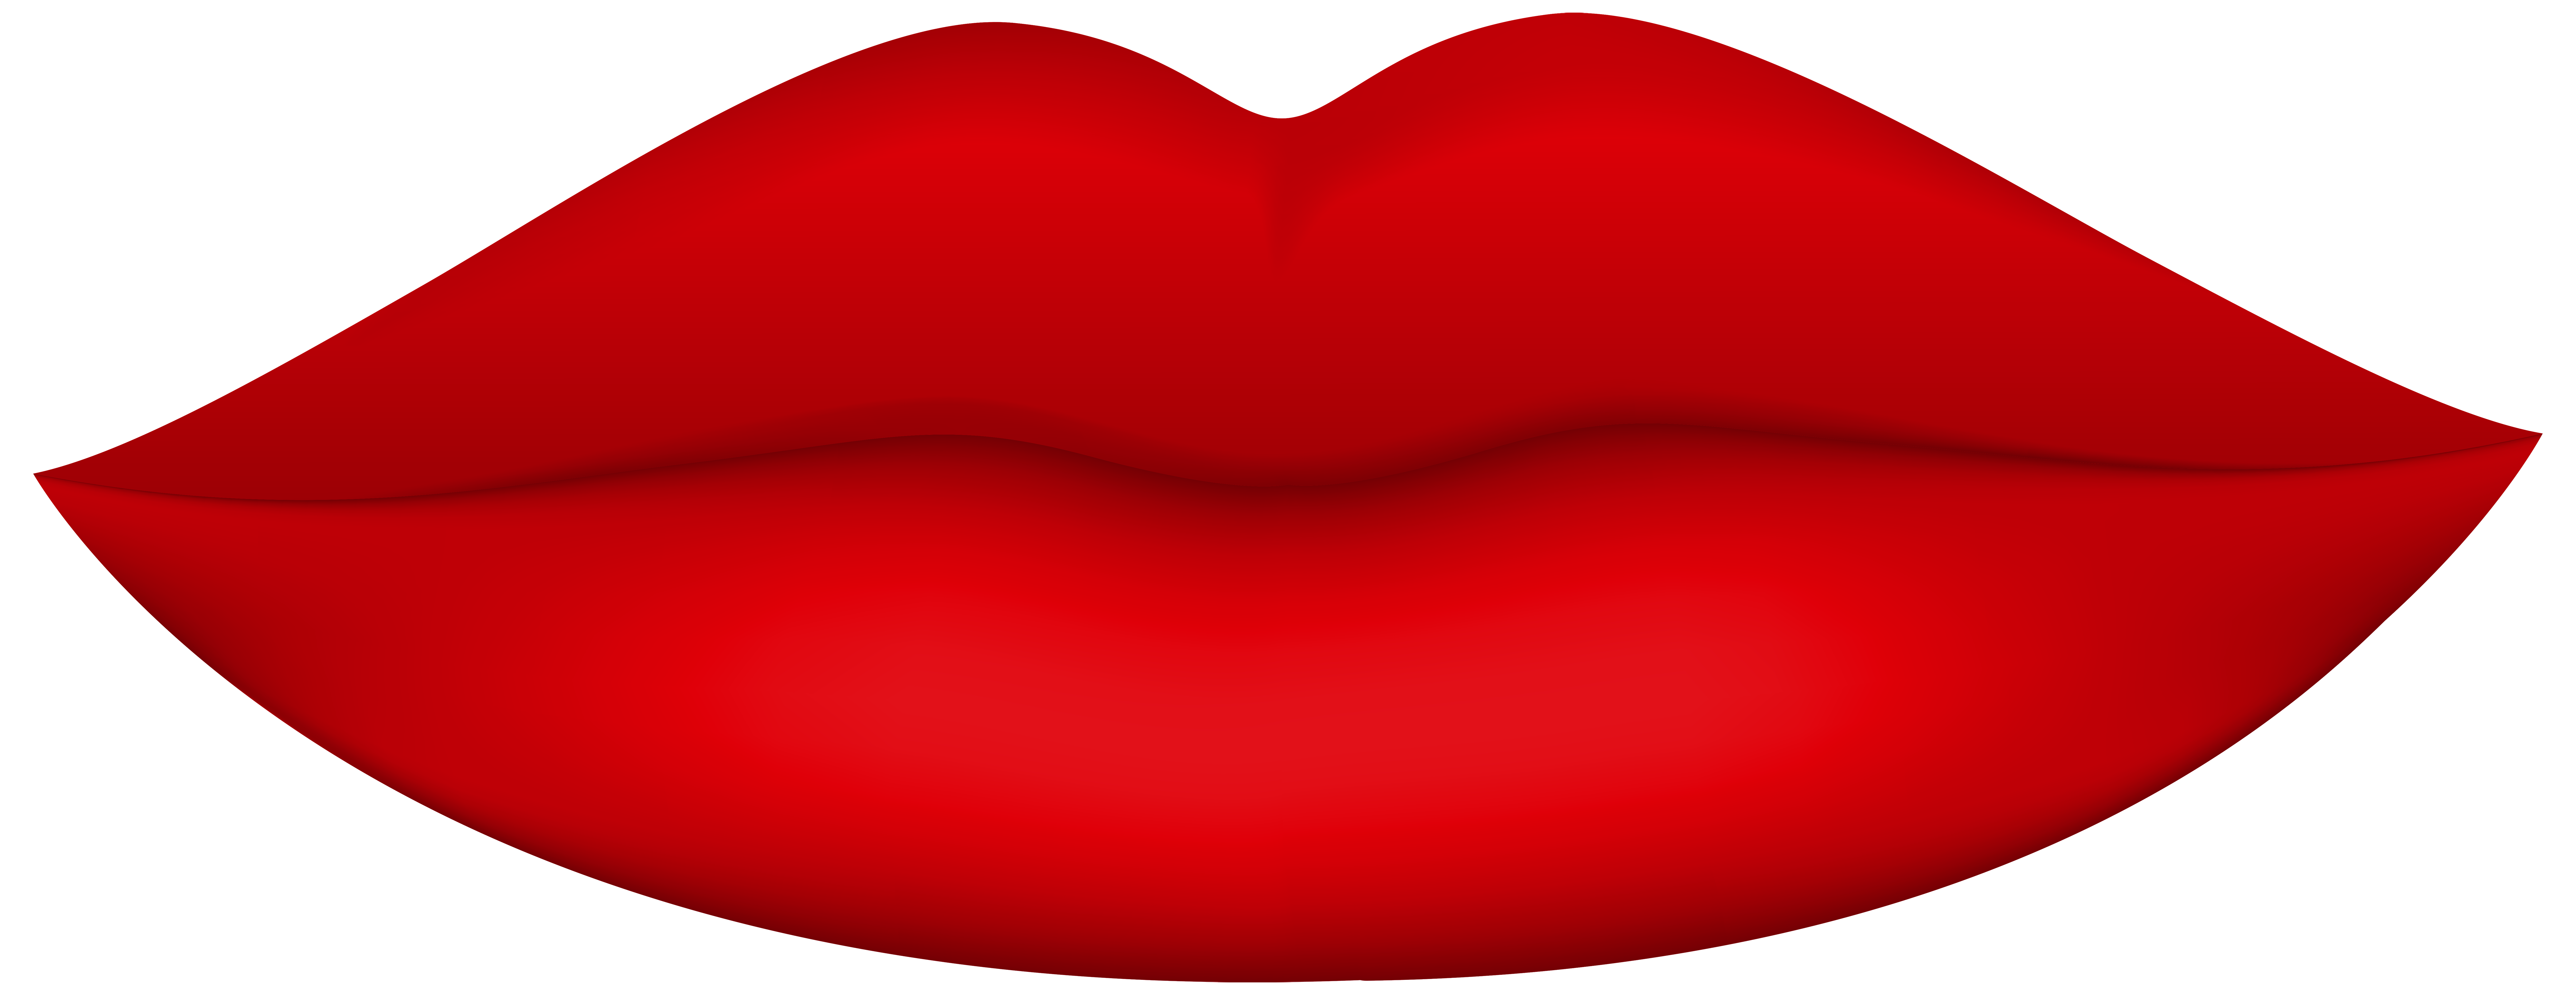 Mouth clipart lip reading, Mouth lip reading Transparent FREE for ...